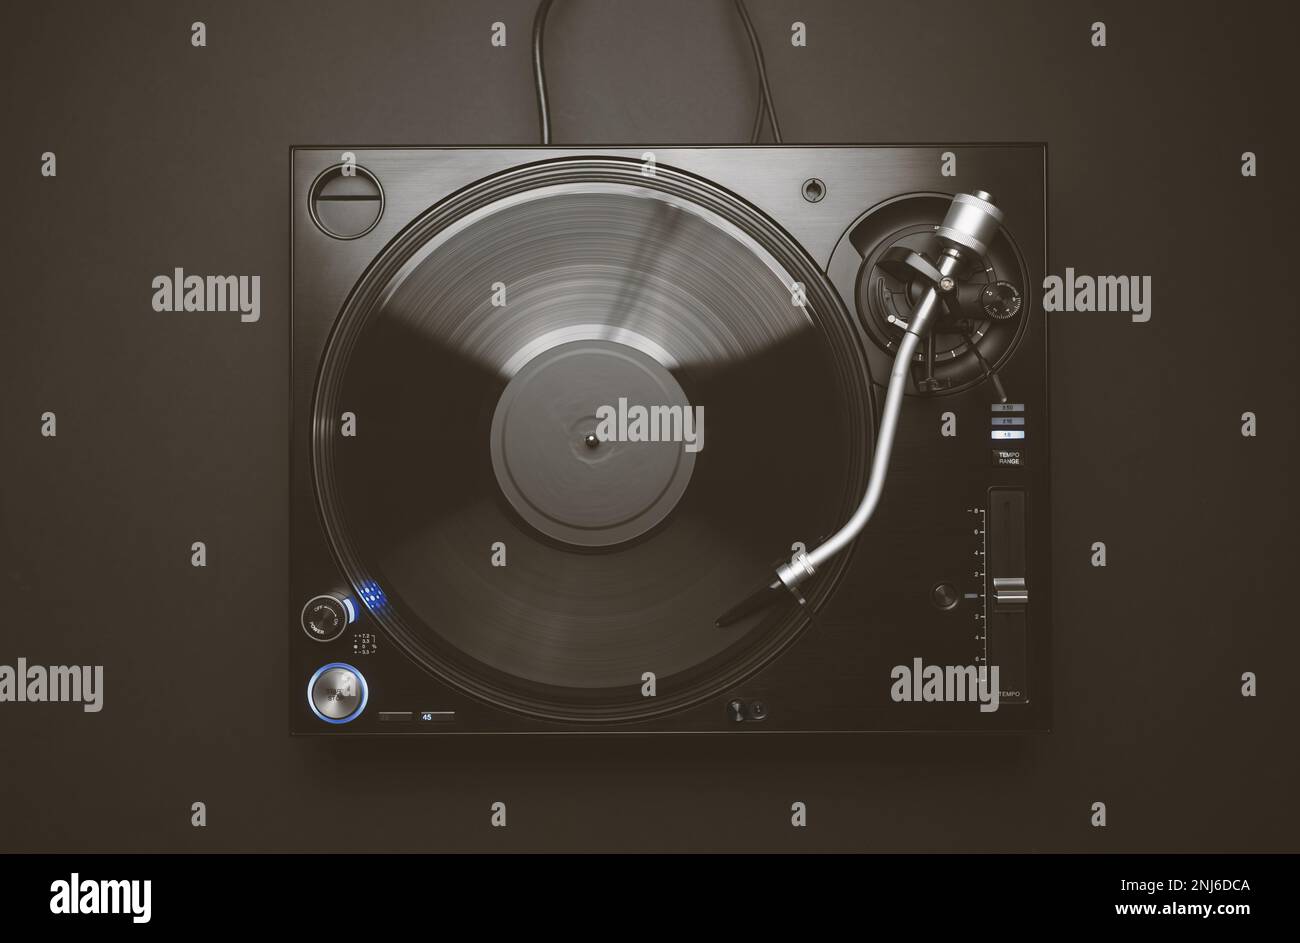 Flat lay image of dj turntable on black background. Overhead photo of professional disc jockey record player Stock Photo